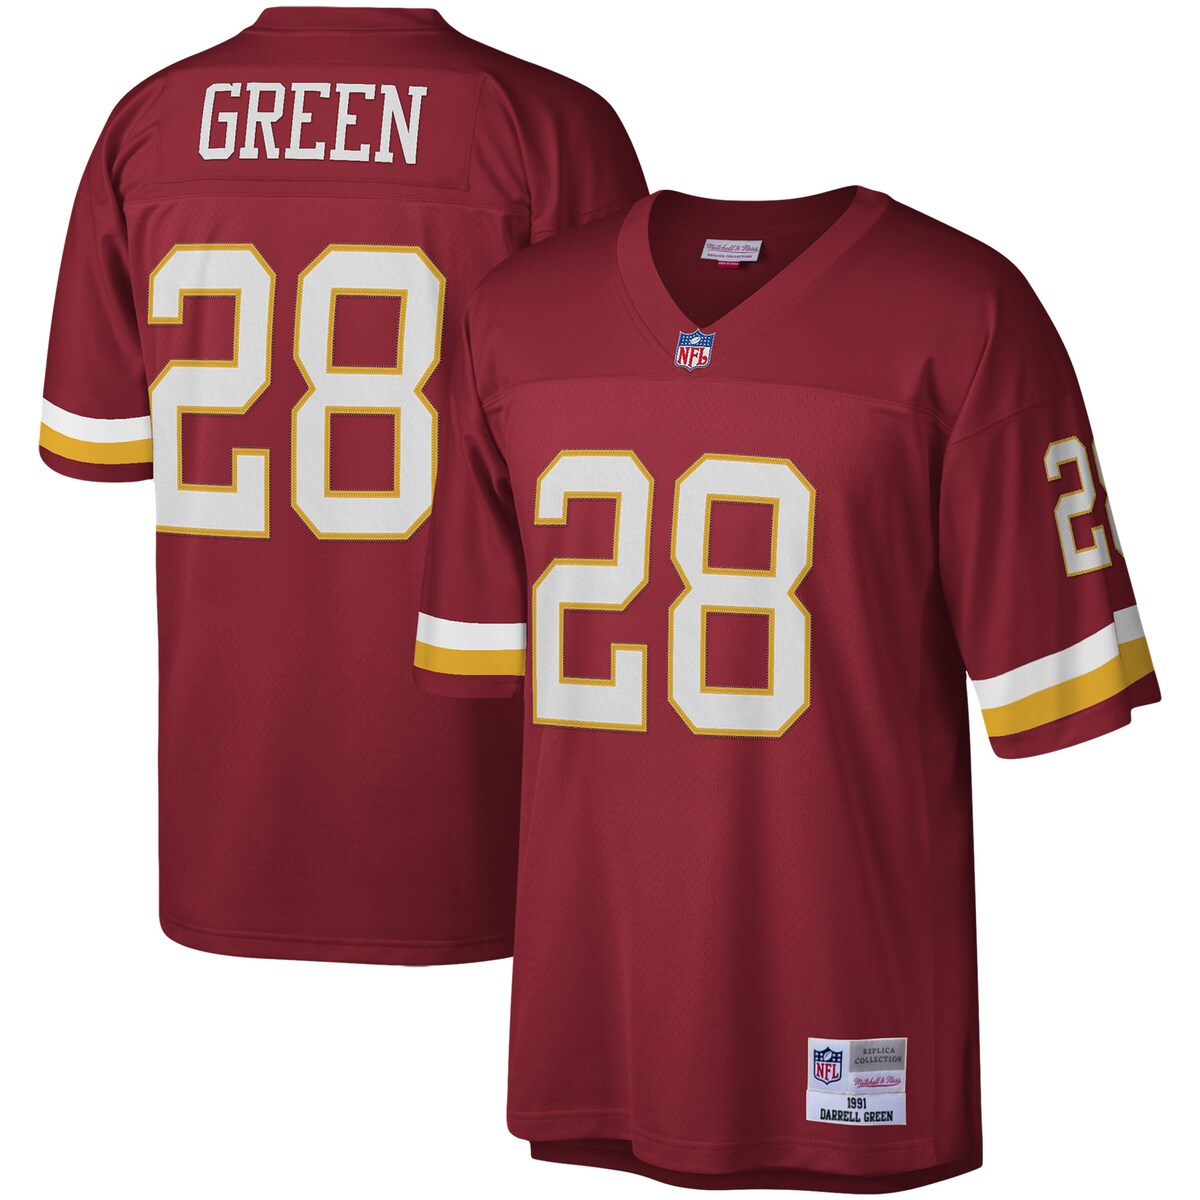 Show off your fandom for Darrell Green and the Washington Football Team with this Legacy replica jersey from Mitchell & Ness. It features distinctive throwback team graphics on the chest and back, as well as vibrant colors. By wearing this jersey, you'll be able to feel like you're reliving some of the great plays that Darrell Green accomplished to lead the Washington Football Team to glory.Brand: Mitchell & NessImportedShort sleeveMaterial: 100% PolyesterMachine wash, line dryOfficially licensedThrowback Jersey